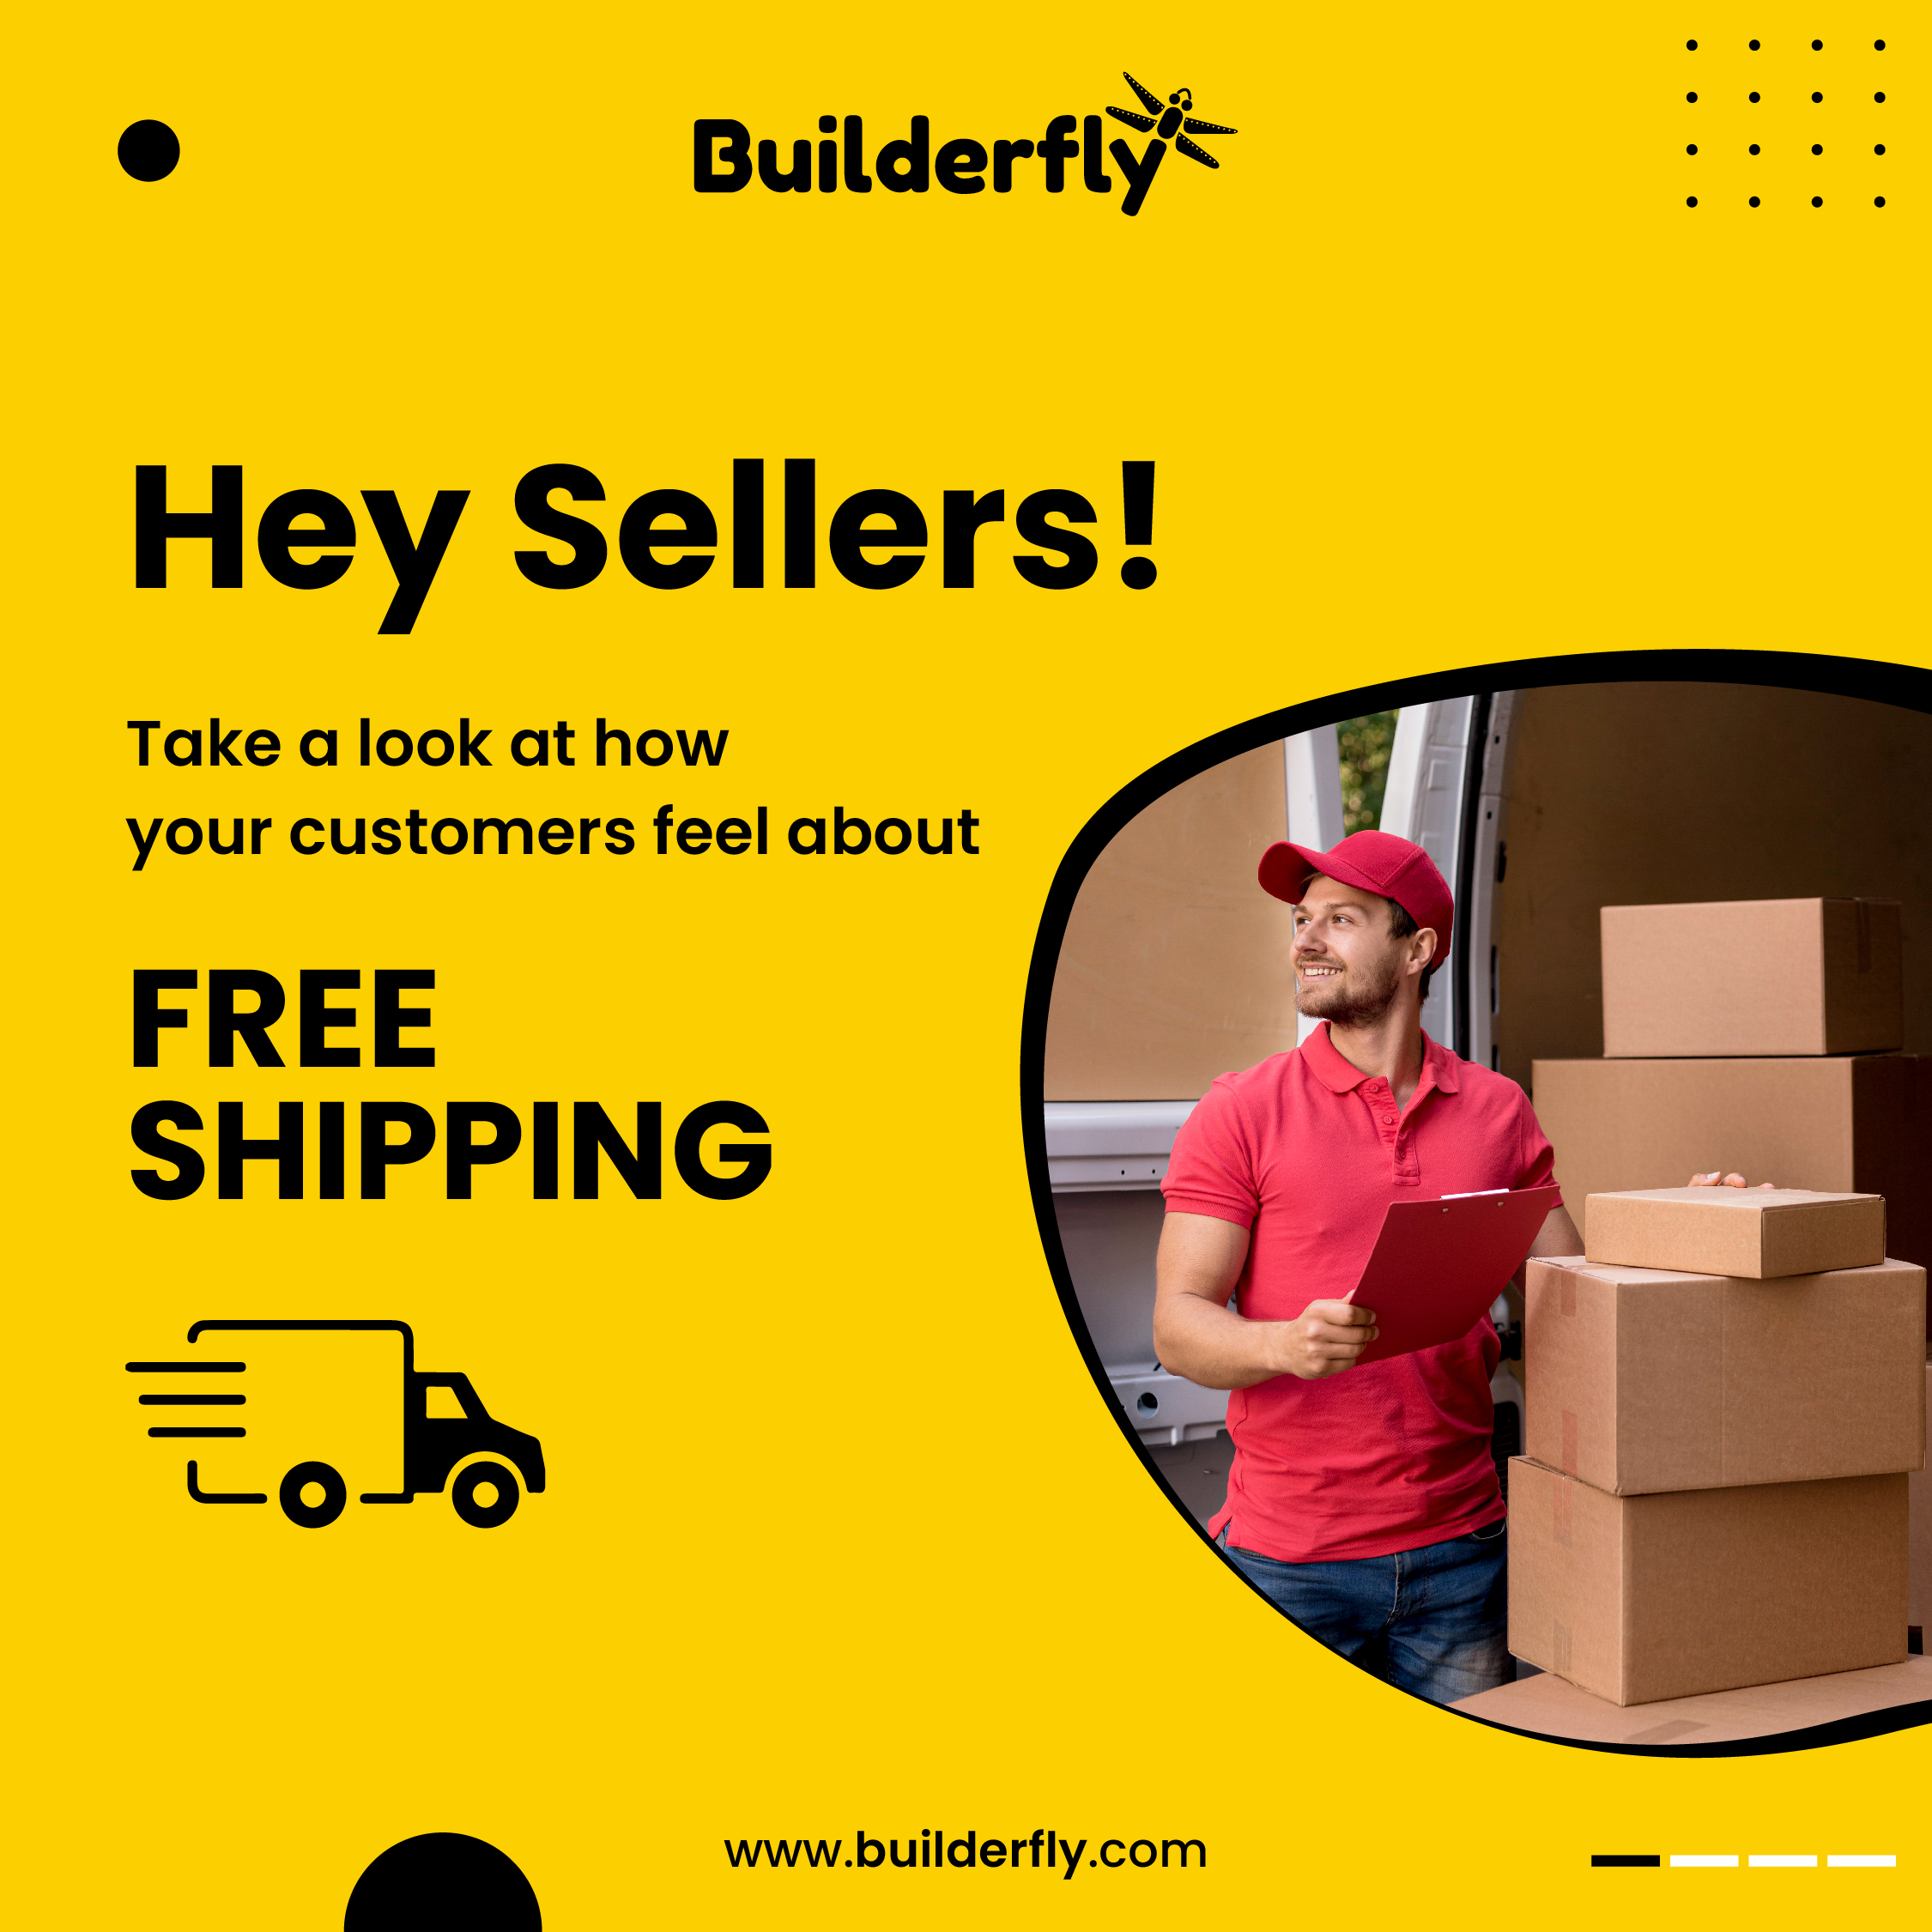 Sellers, do you have enough margins to provide free delivery to your customers?